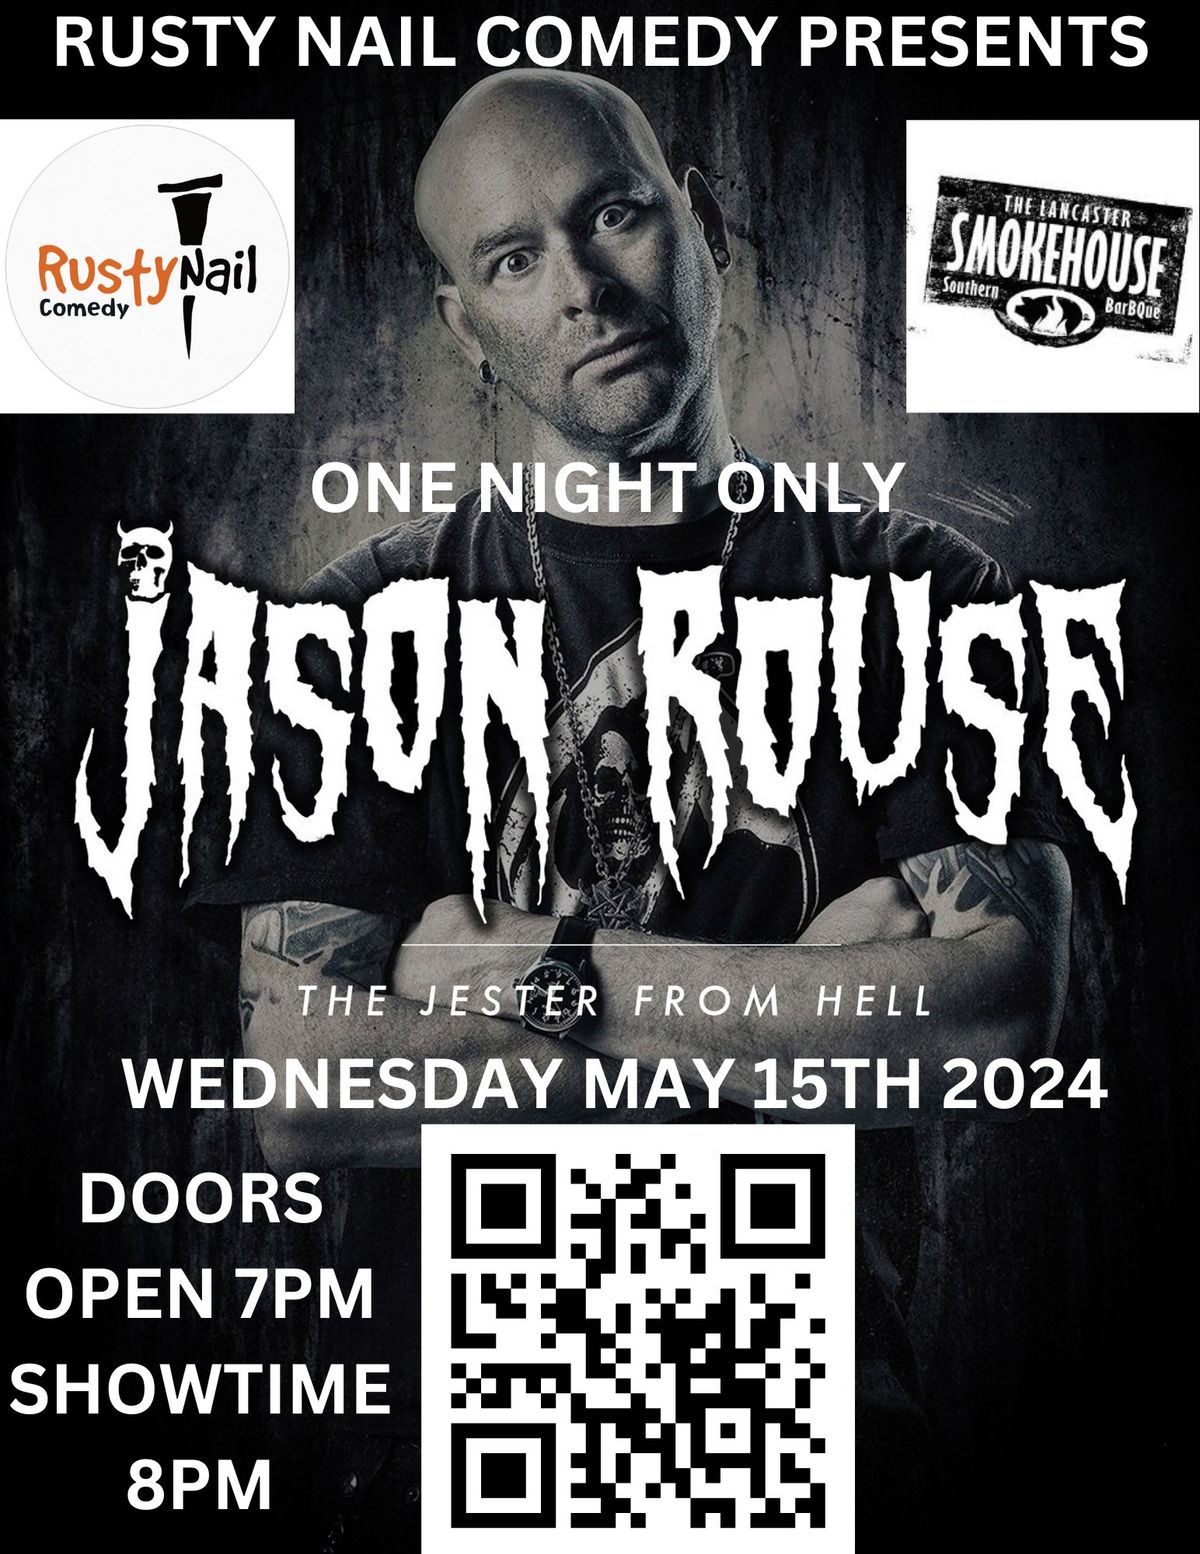 Rusty Nail Comedy at Lancaster Smokehouse with international comedian Jason Rouse